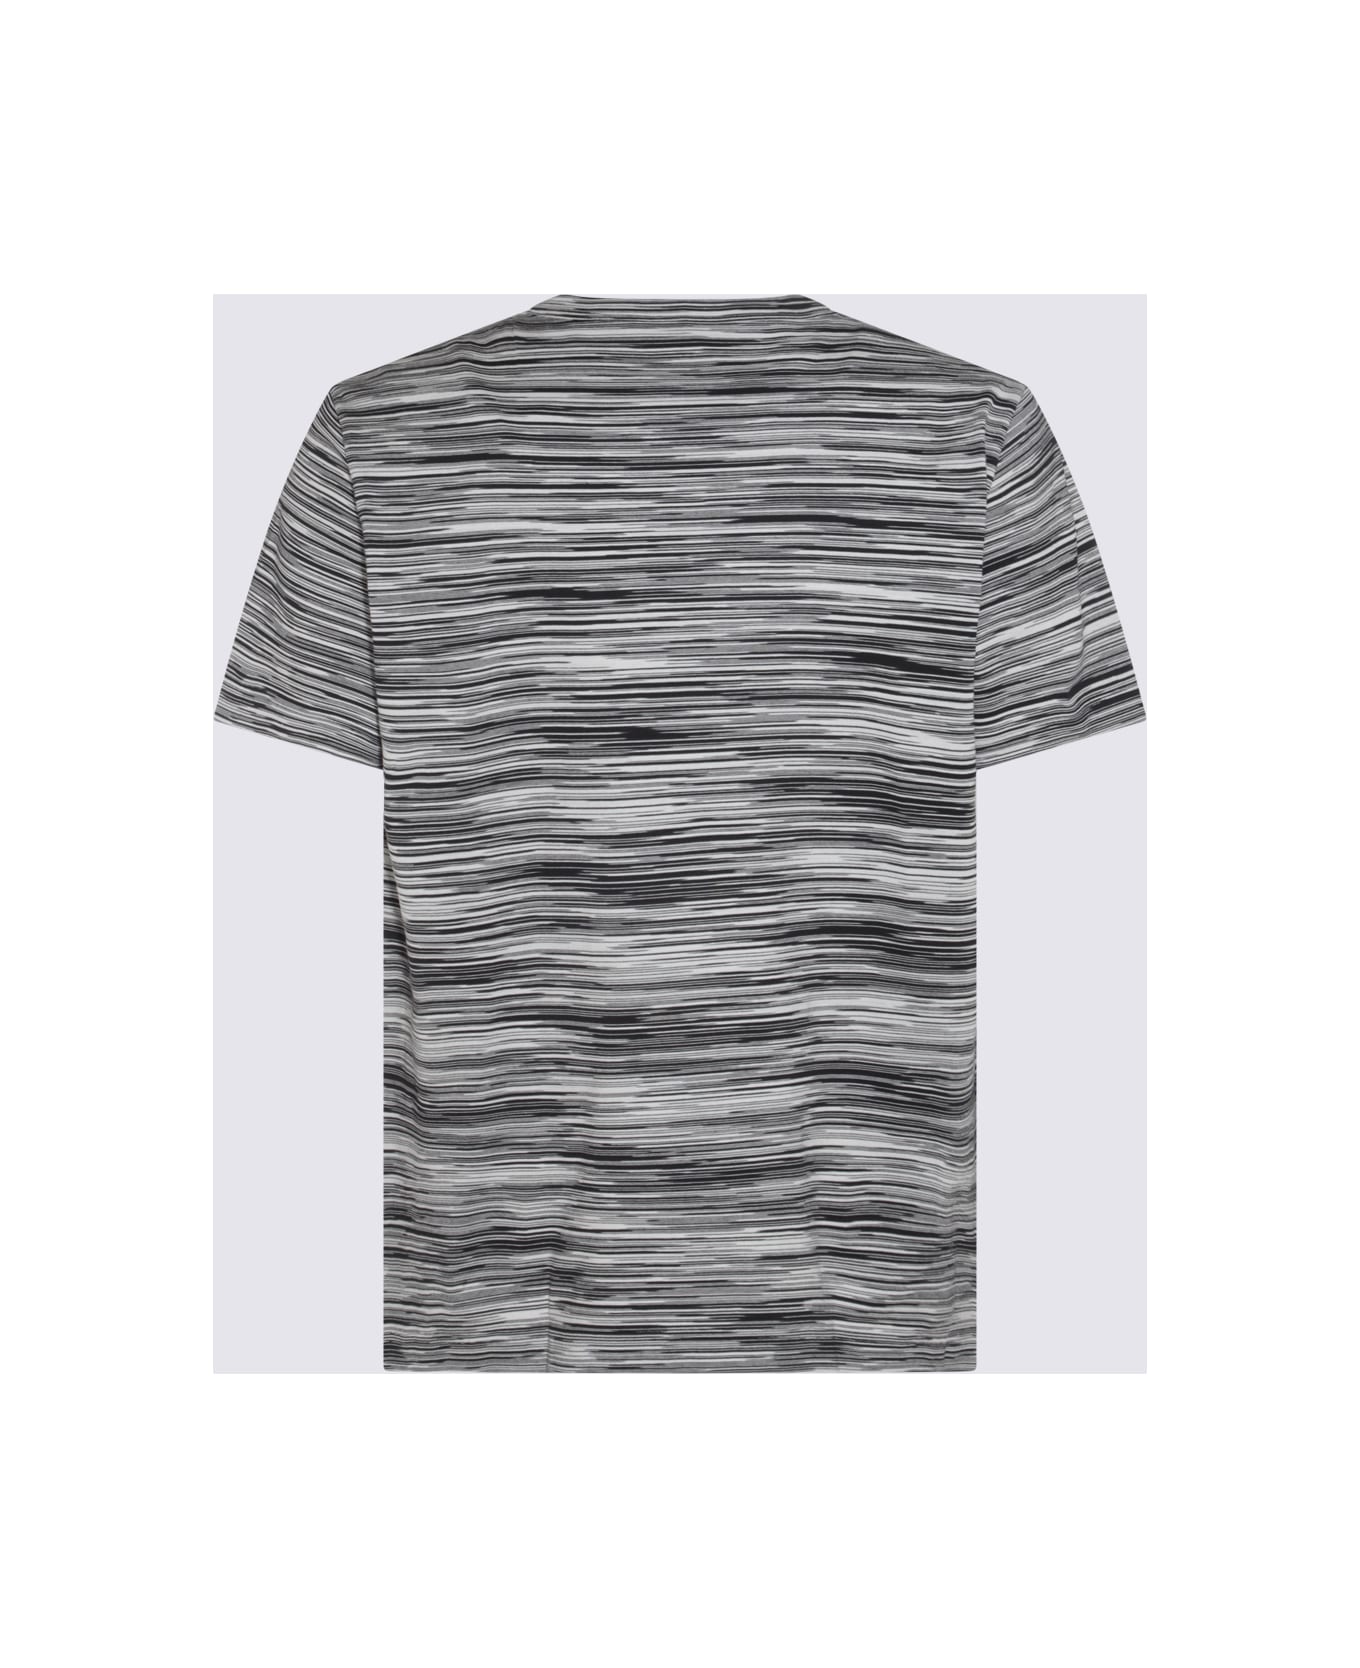 Missoni Multicolor Cotton T-shirt - SPACE DYED BLACK AND WHITE シャツ